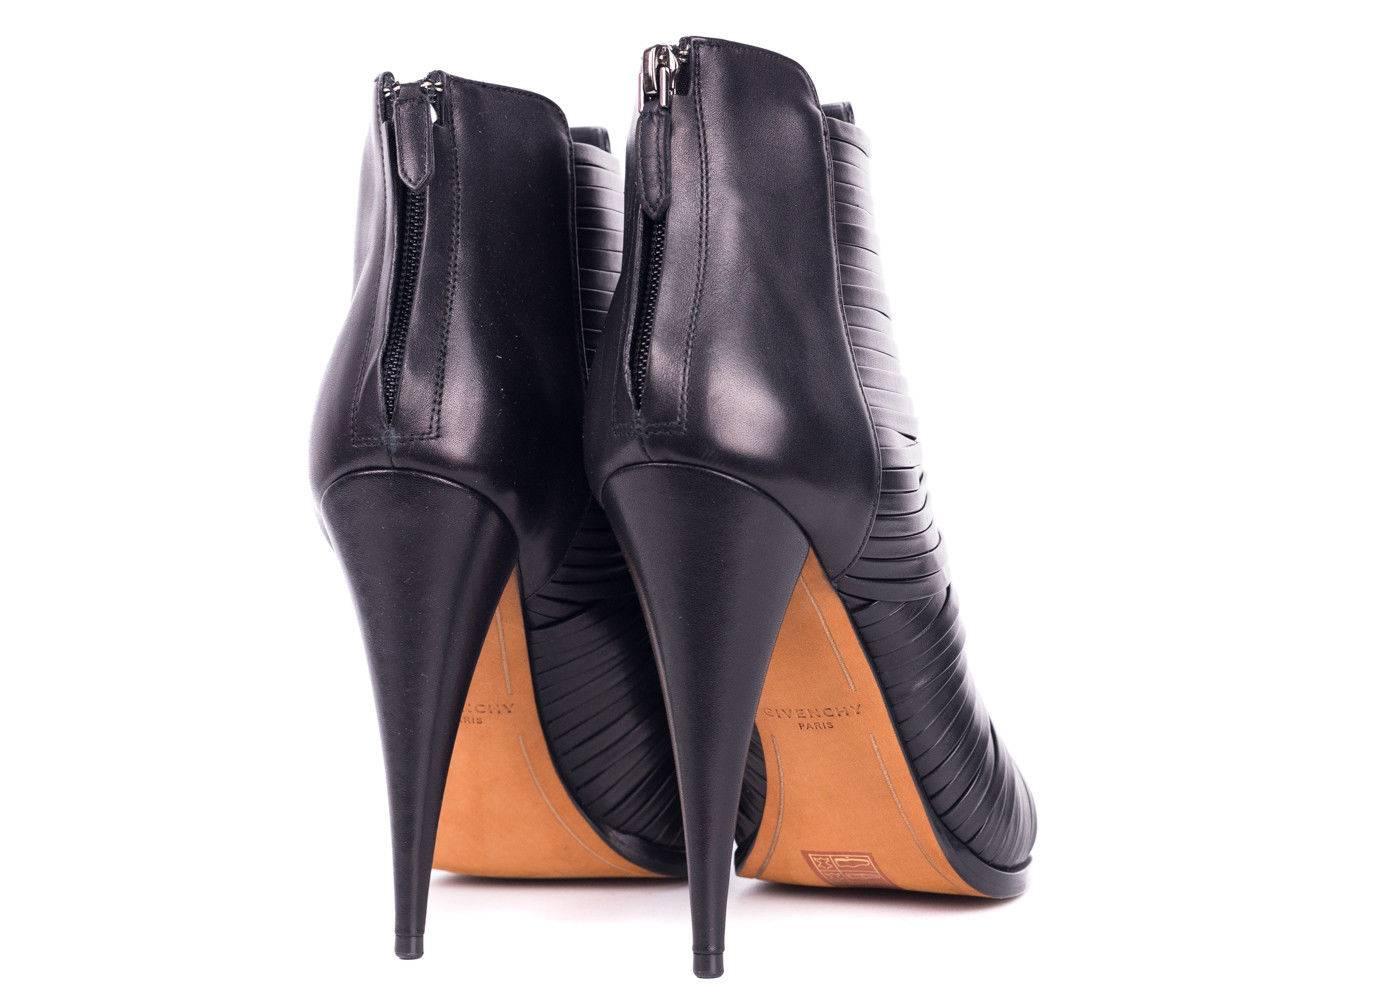 Givenchy Womens Black Leather Wrap Strap Peep Toe Booties In New Condition For Sale In Brooklyn, NY